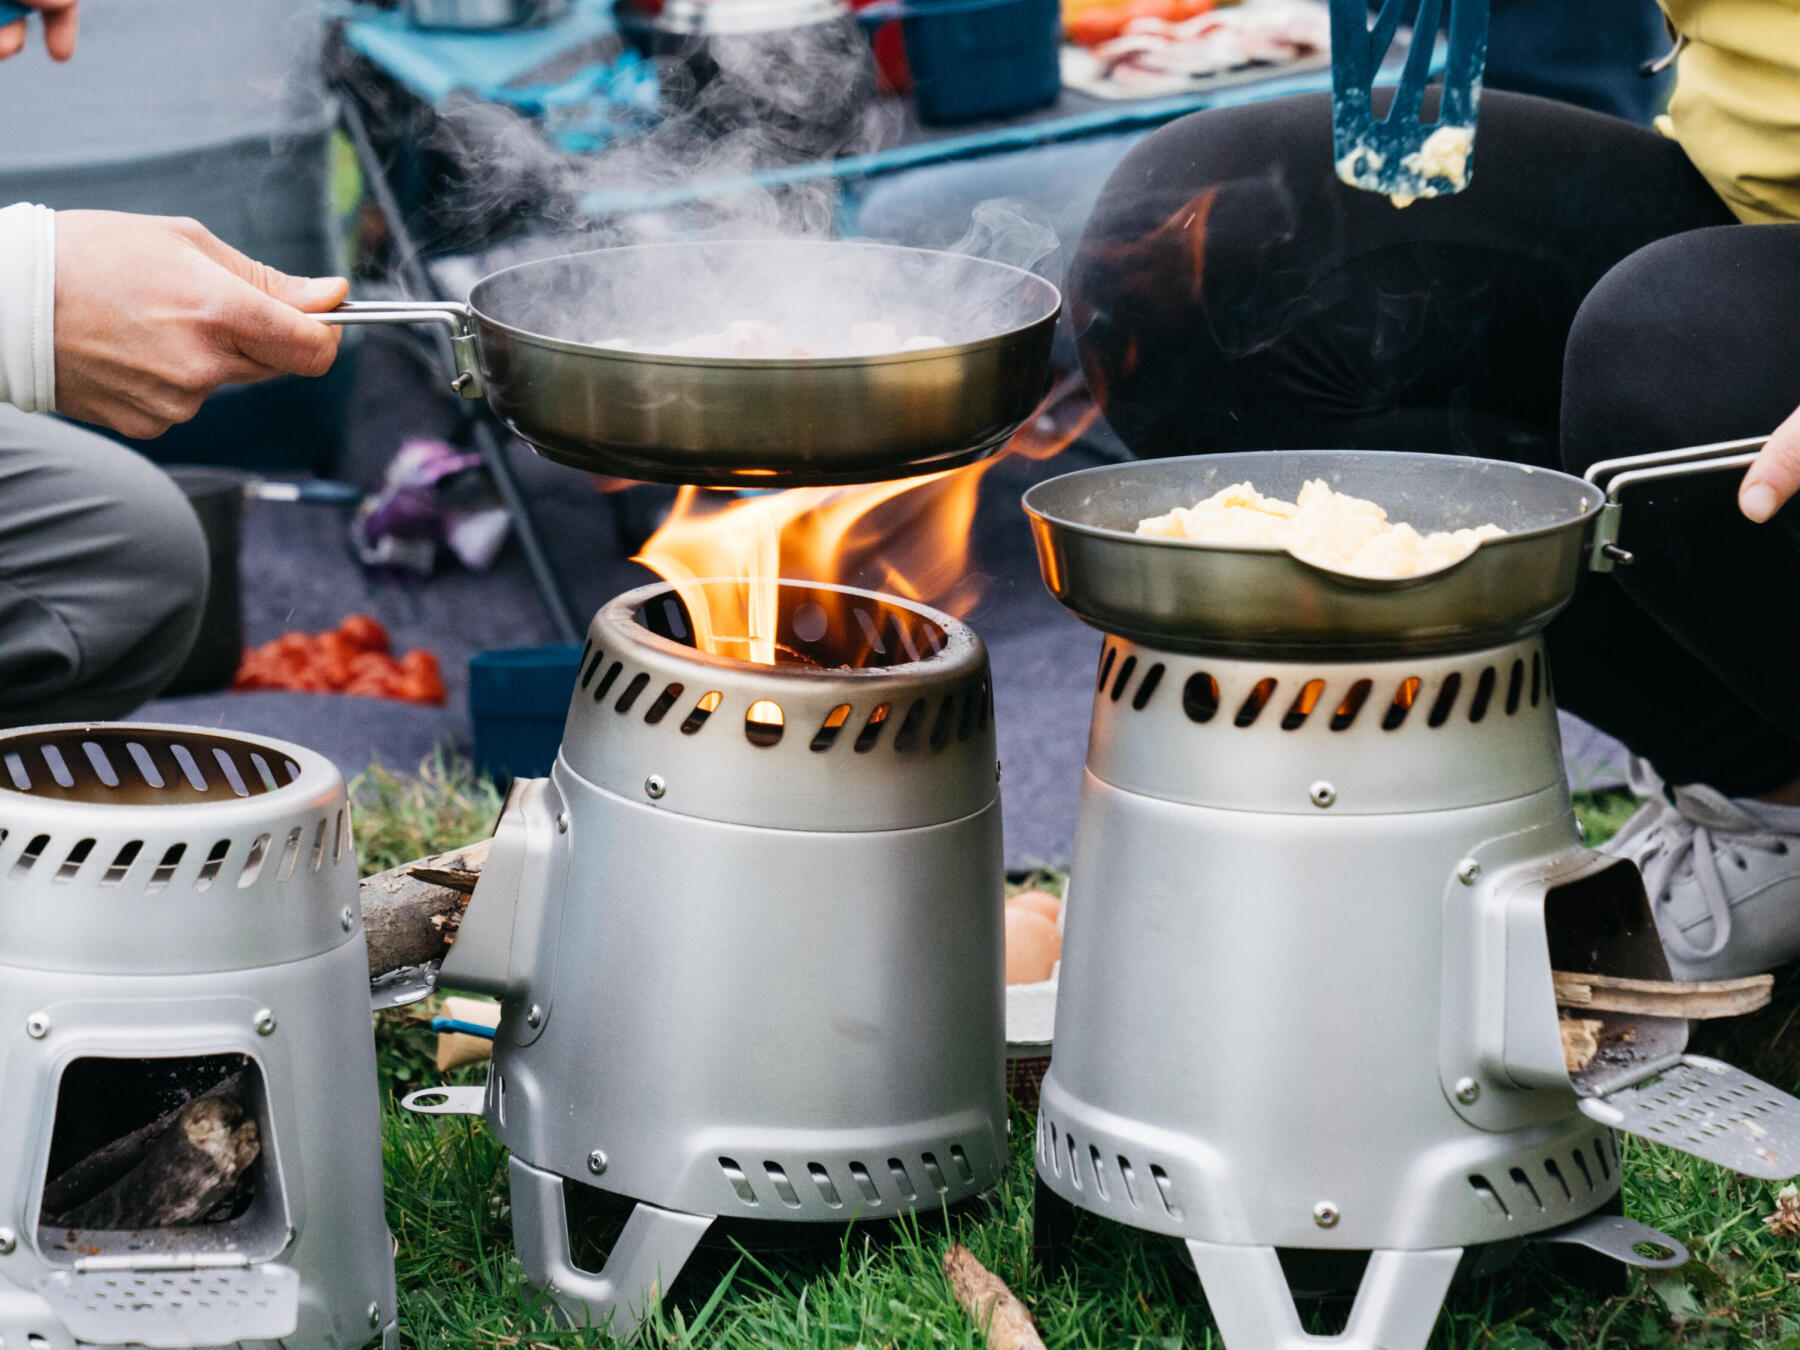 Tips for easy camp-site cooking